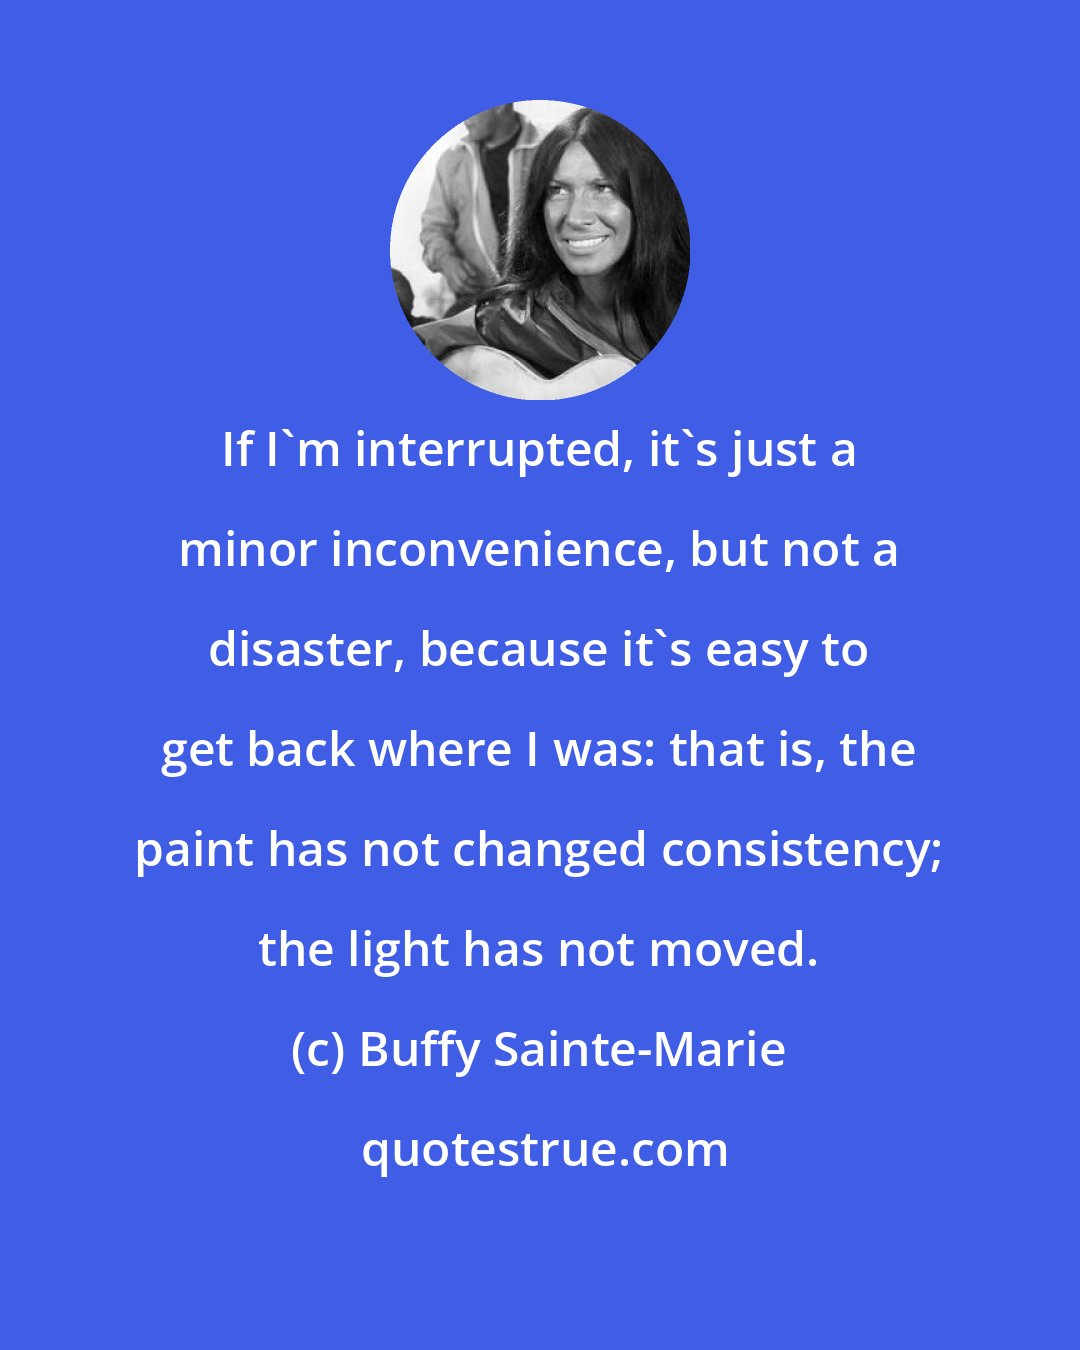 Buffy Sainte-Marie: If I'm interrupted, it's just a minor inconvenience, but not a disaster, because it's easy to get back where I was: that is, the paint has not changed consistency; the light has not moved.